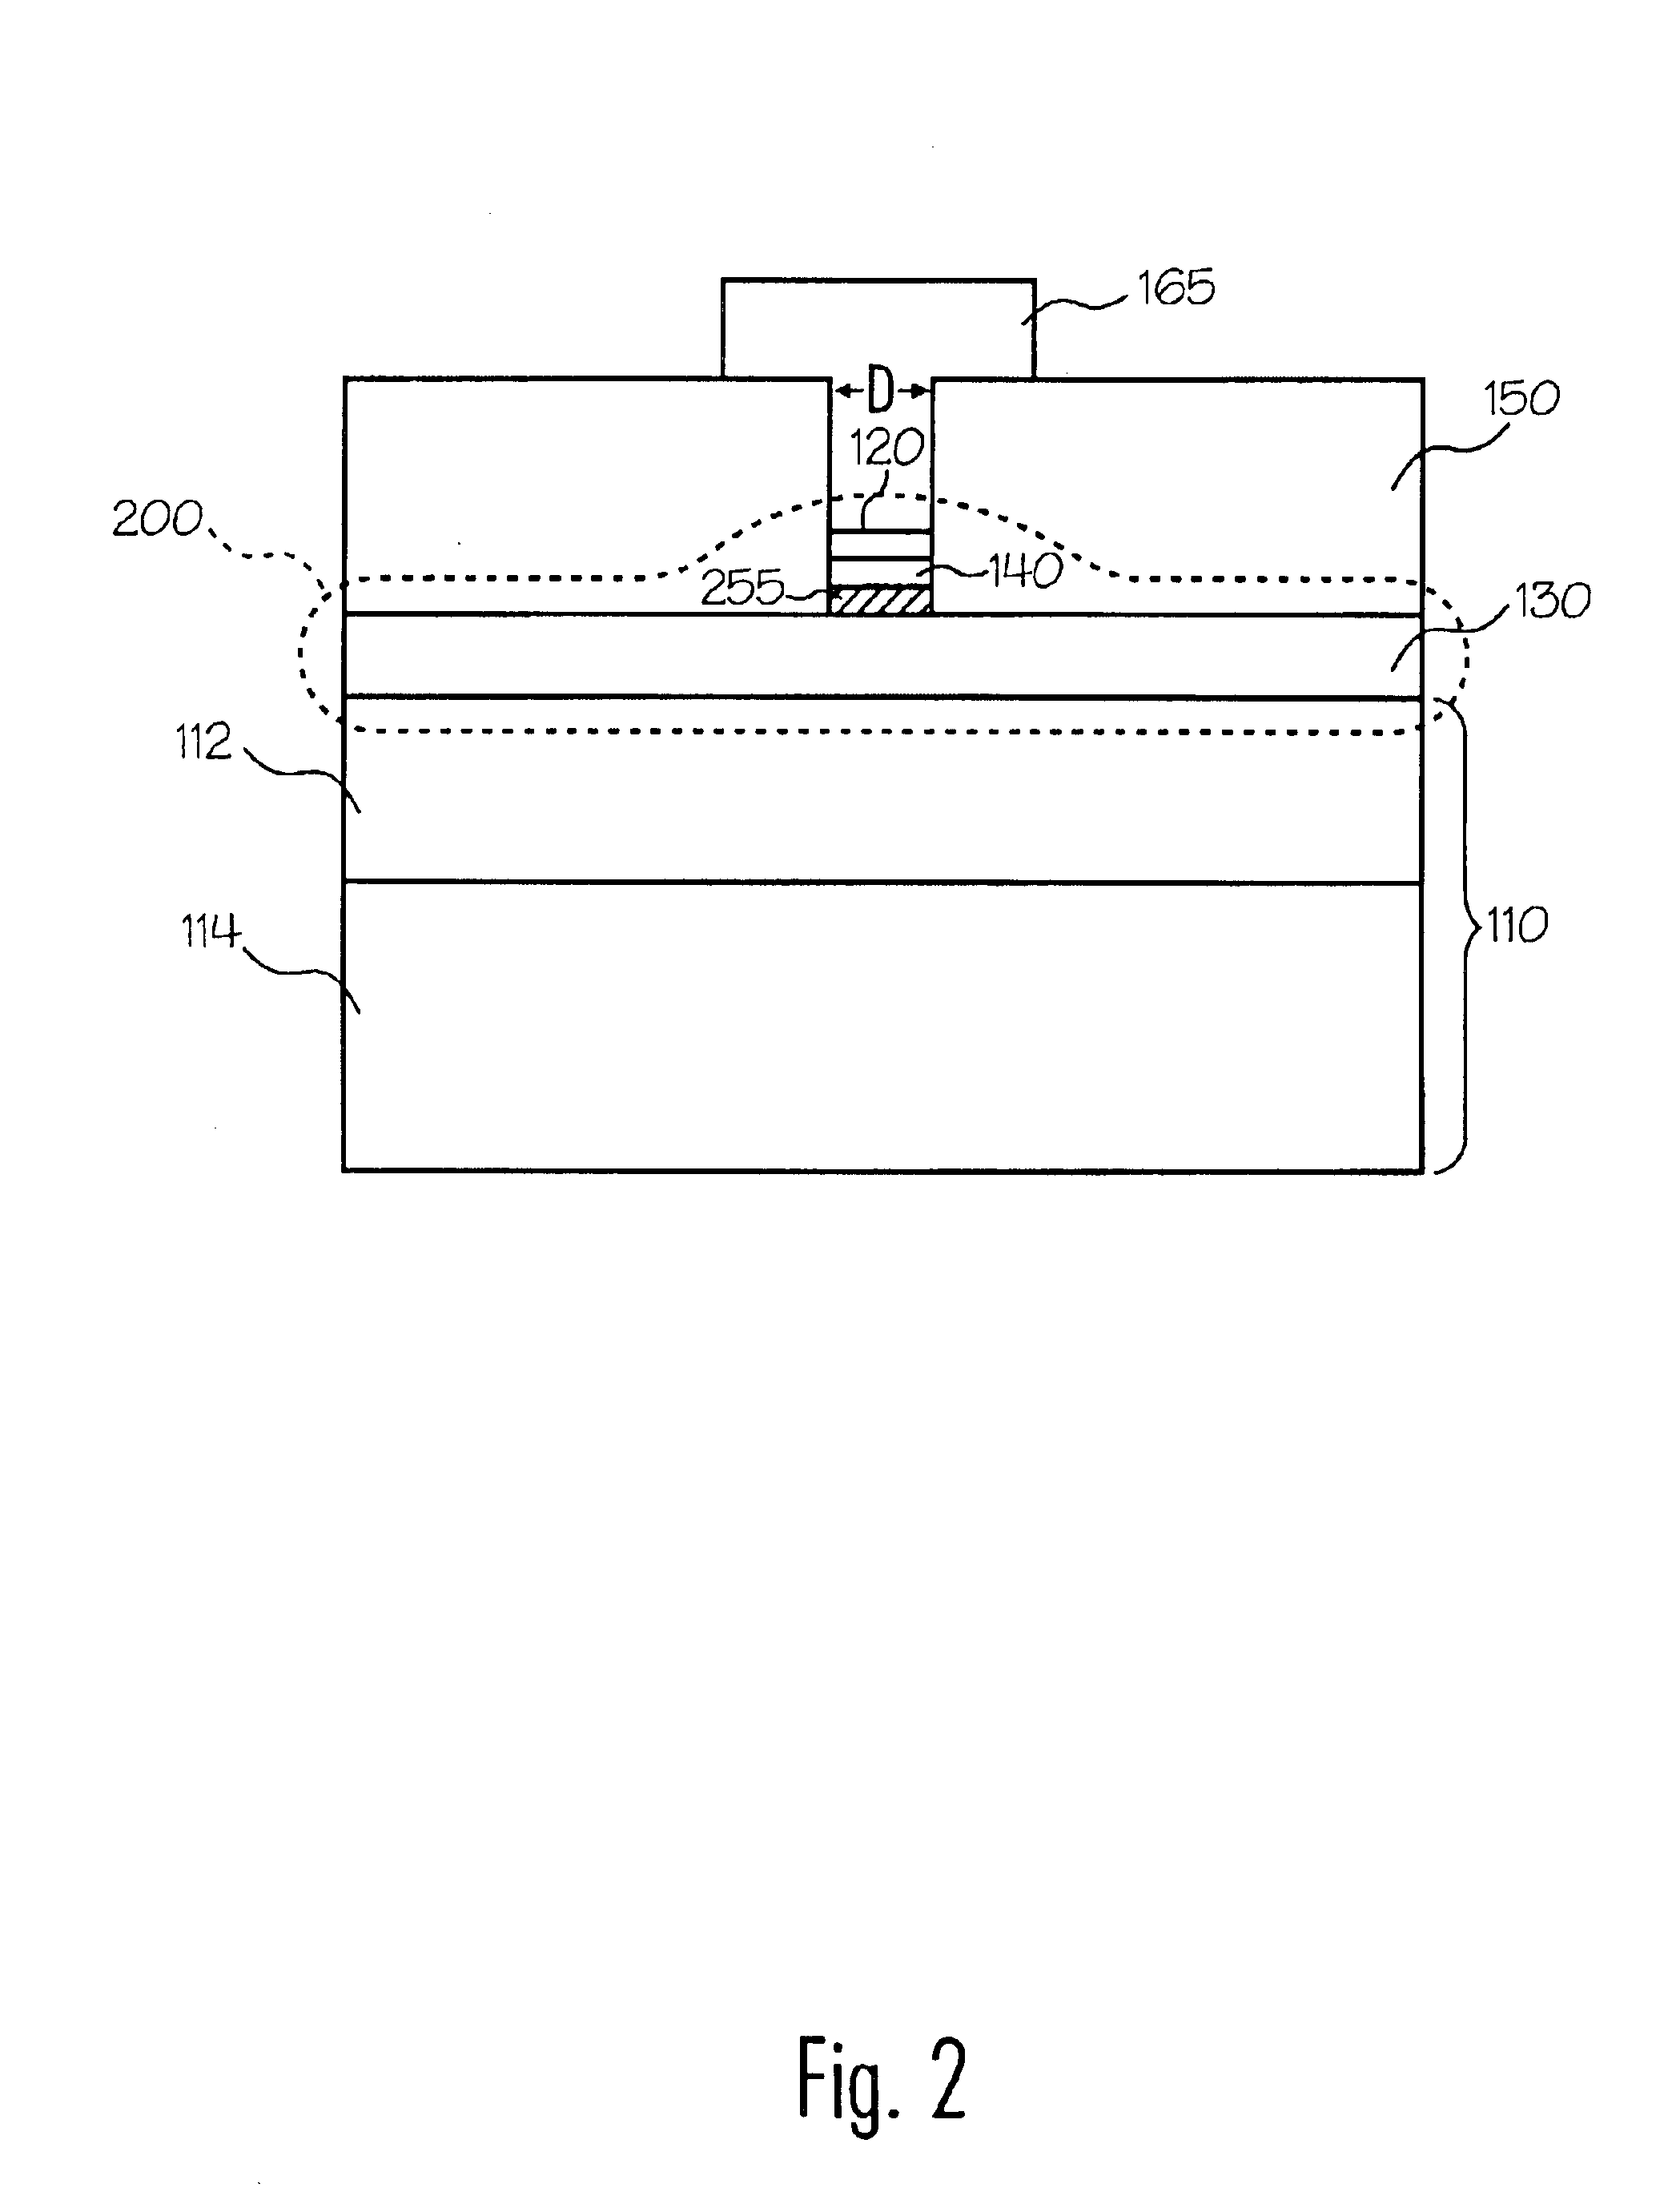 Programming circuit for a programmable microelectronic device, system including the circuit, and method of forming the same